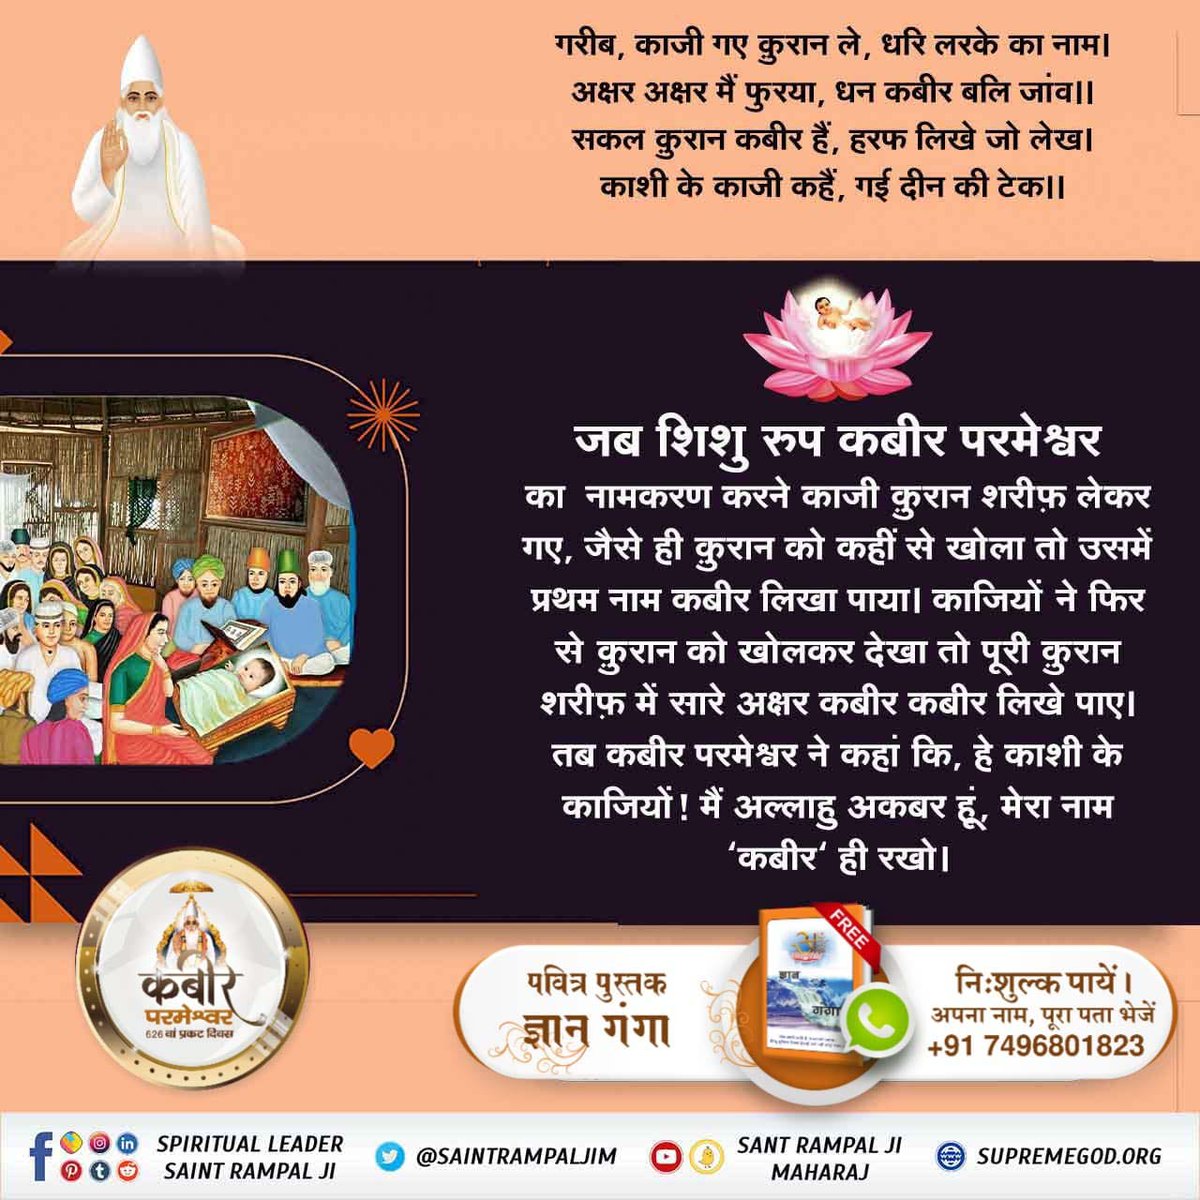 #कबीरजी_का_कलयुगमें_प्राकट्य
When the Qazi took QuranSharif to nameGodKabir as a child,as soon as he opened th Quran from anywhere he found the first nameKabir written in it.When th Qazis opened theQuran again,they found al th letters KabirKabir written in th entire Quran Sharif.